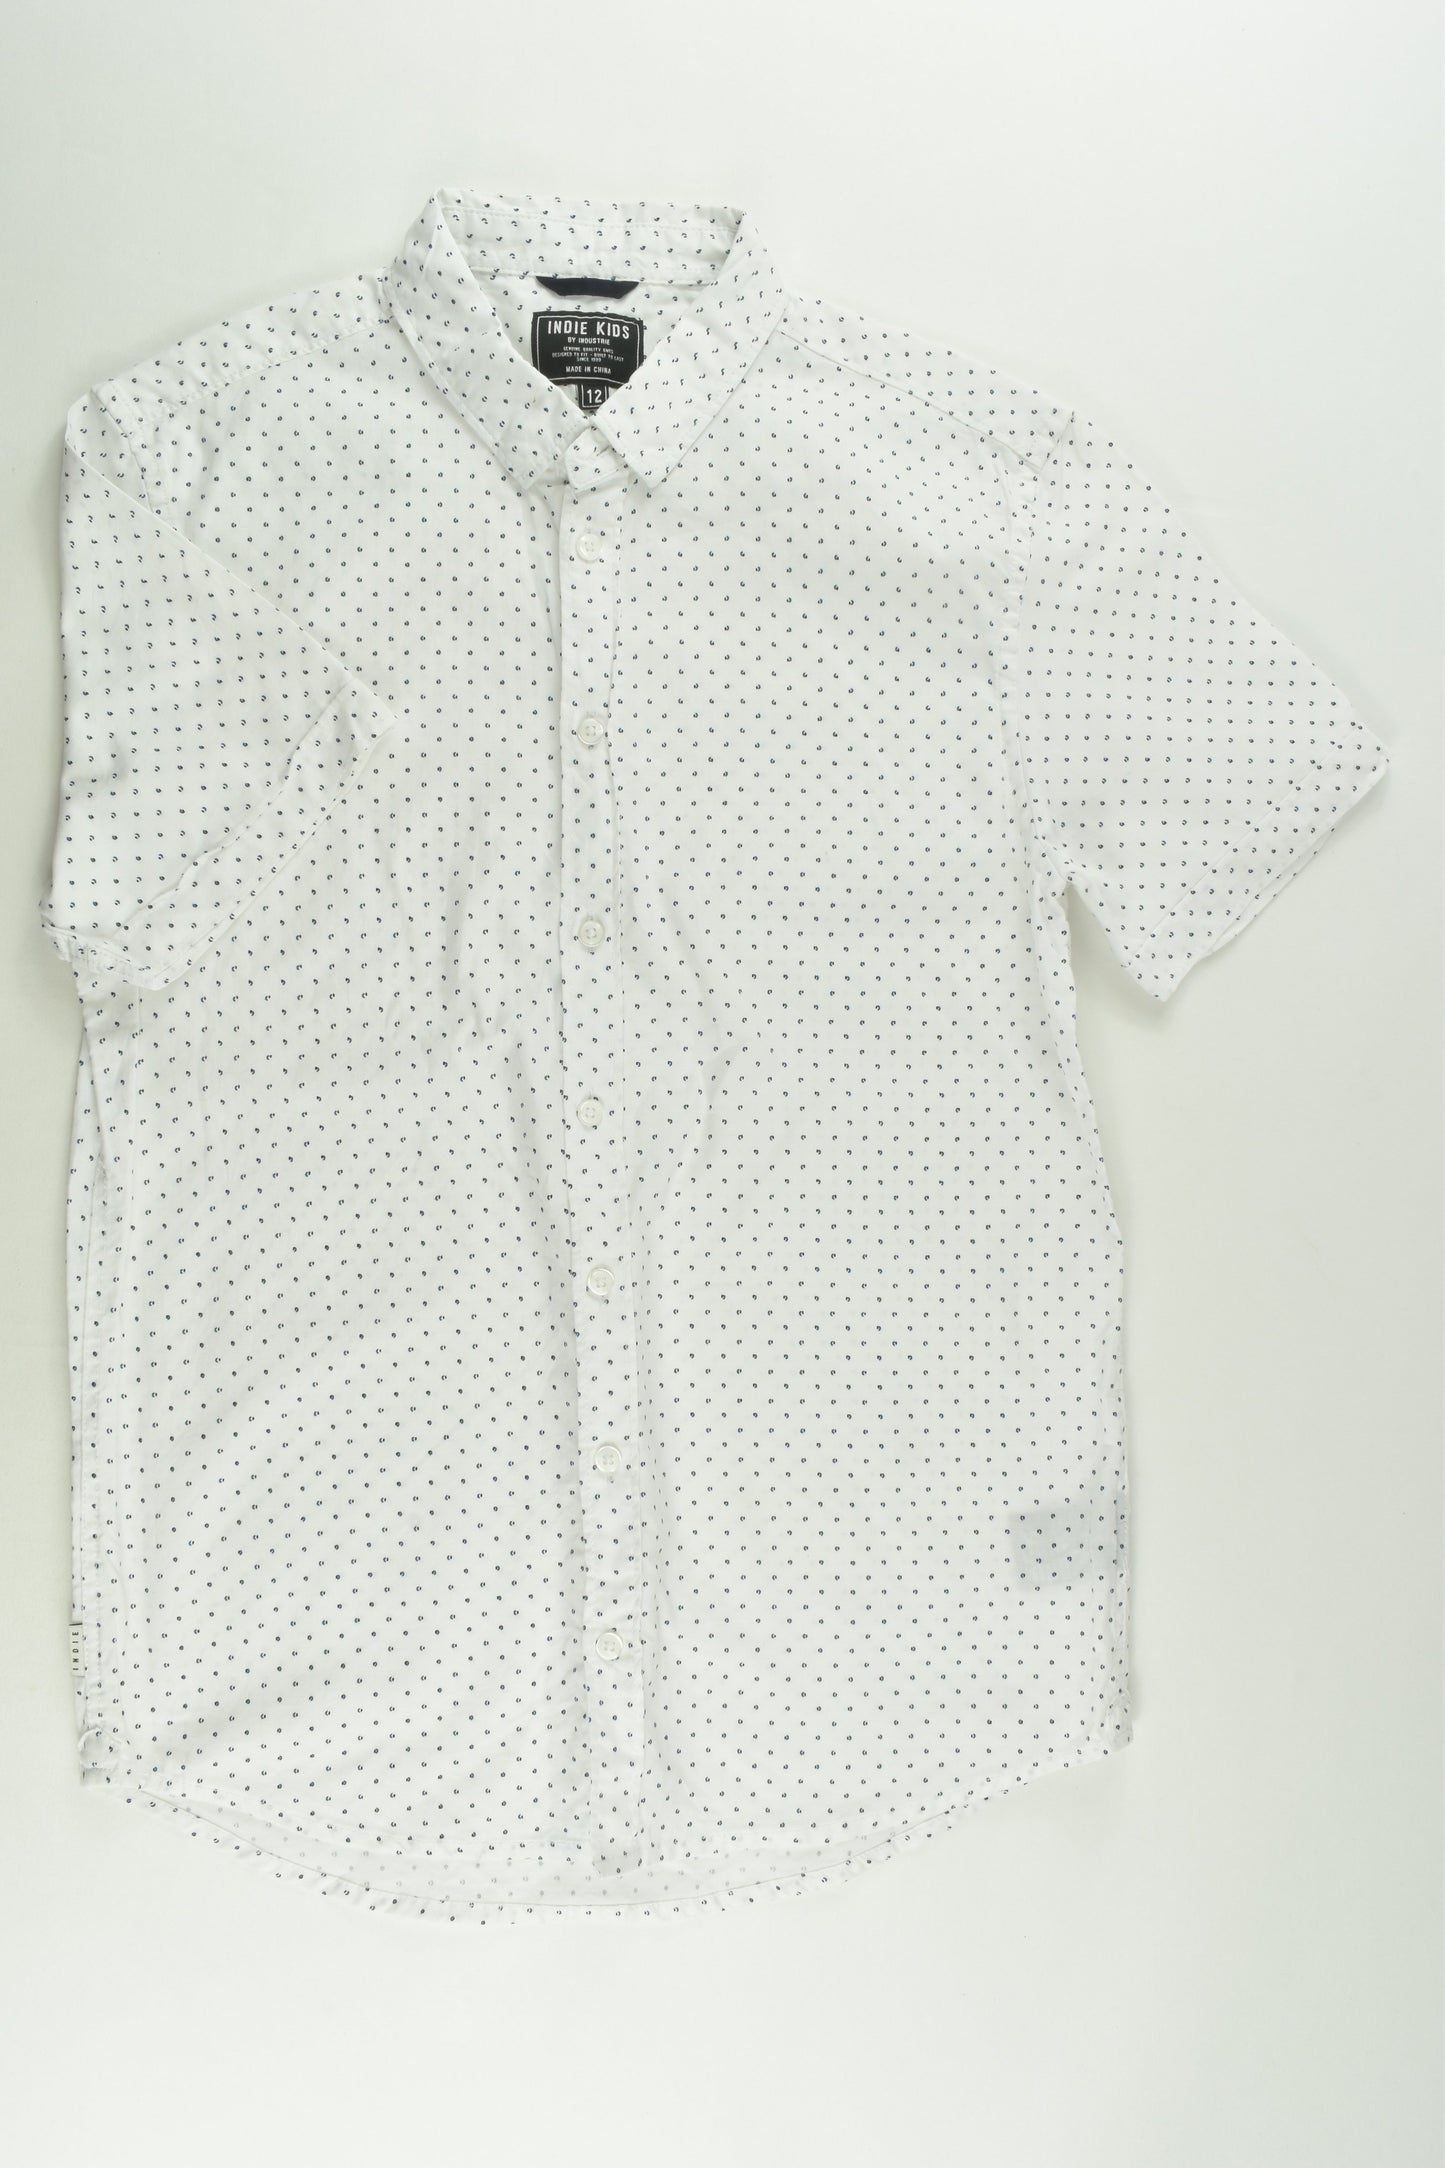 NEW Indie Kids by Industrie Size 12 Shirt